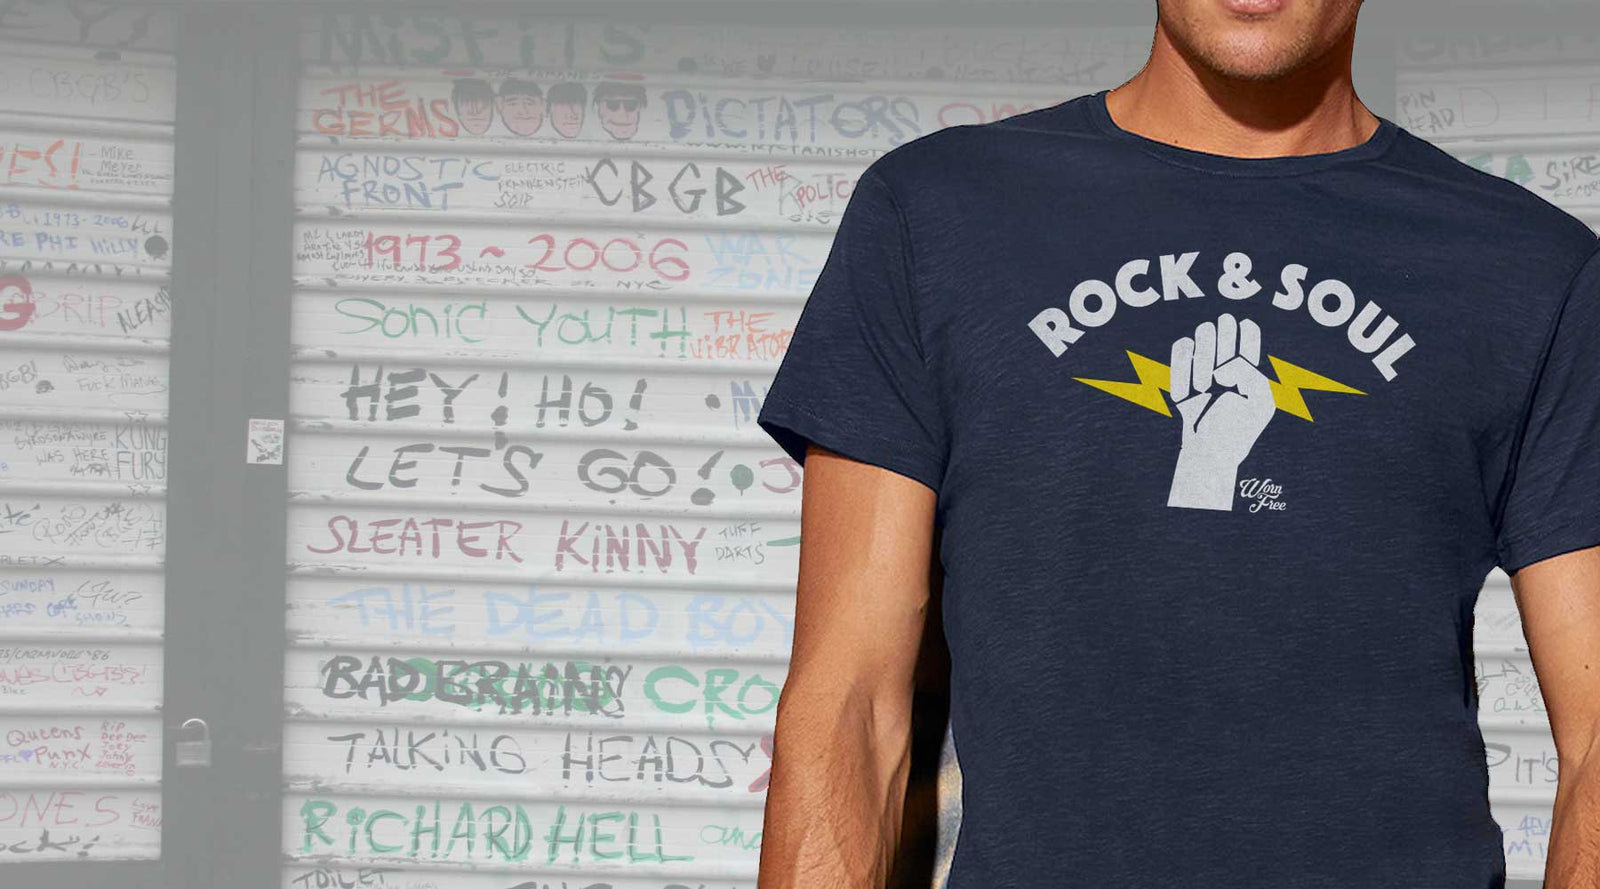 Rock and Soul T-Shirts by music legends.